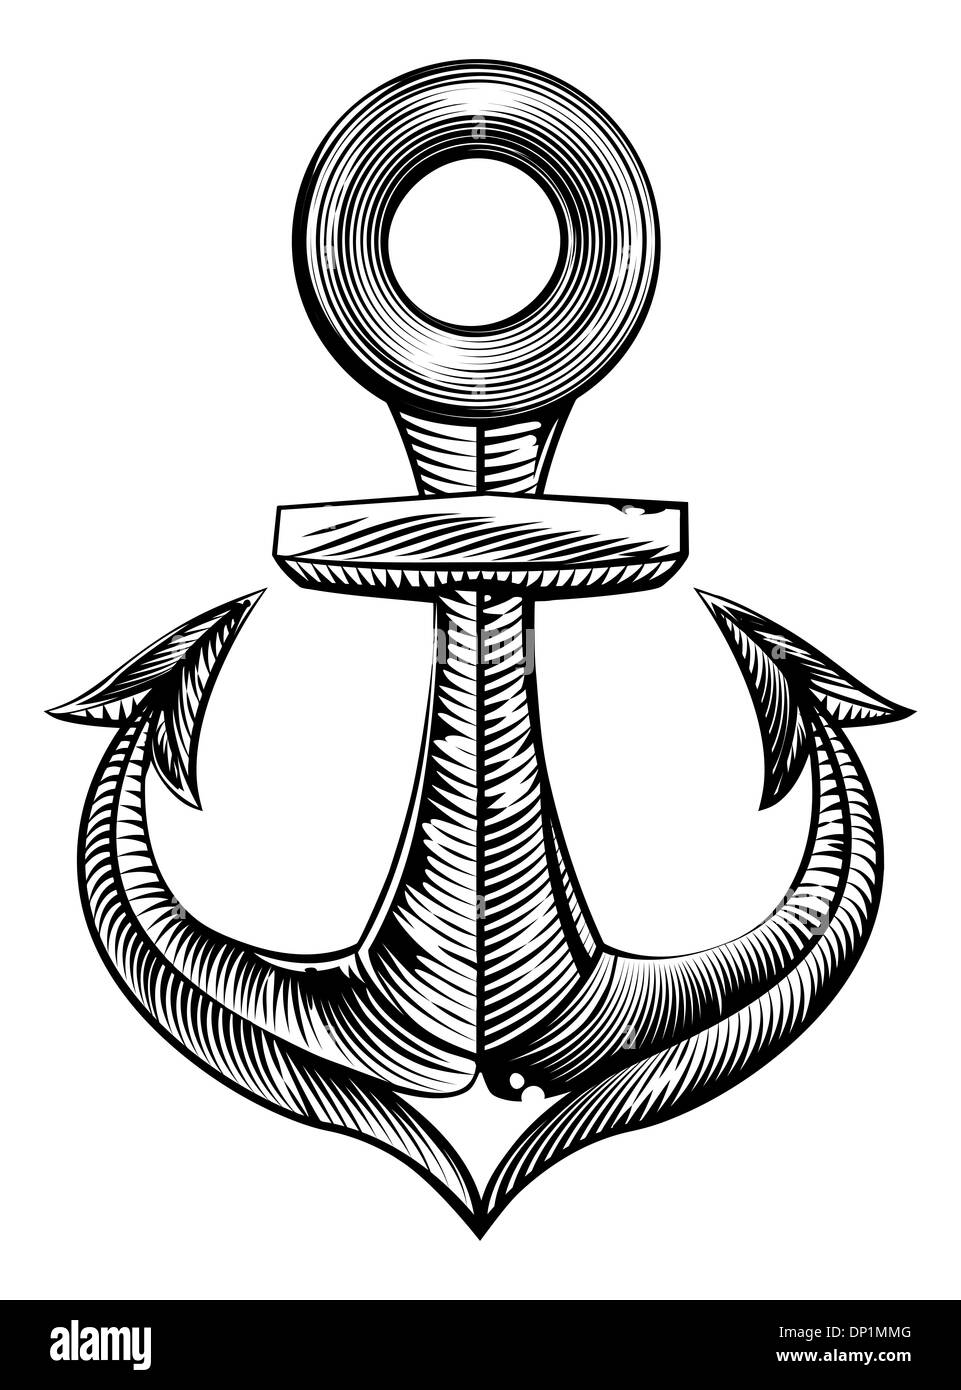 Vintage style anchor illustration in a woodblock or woodcut style Stock Photo